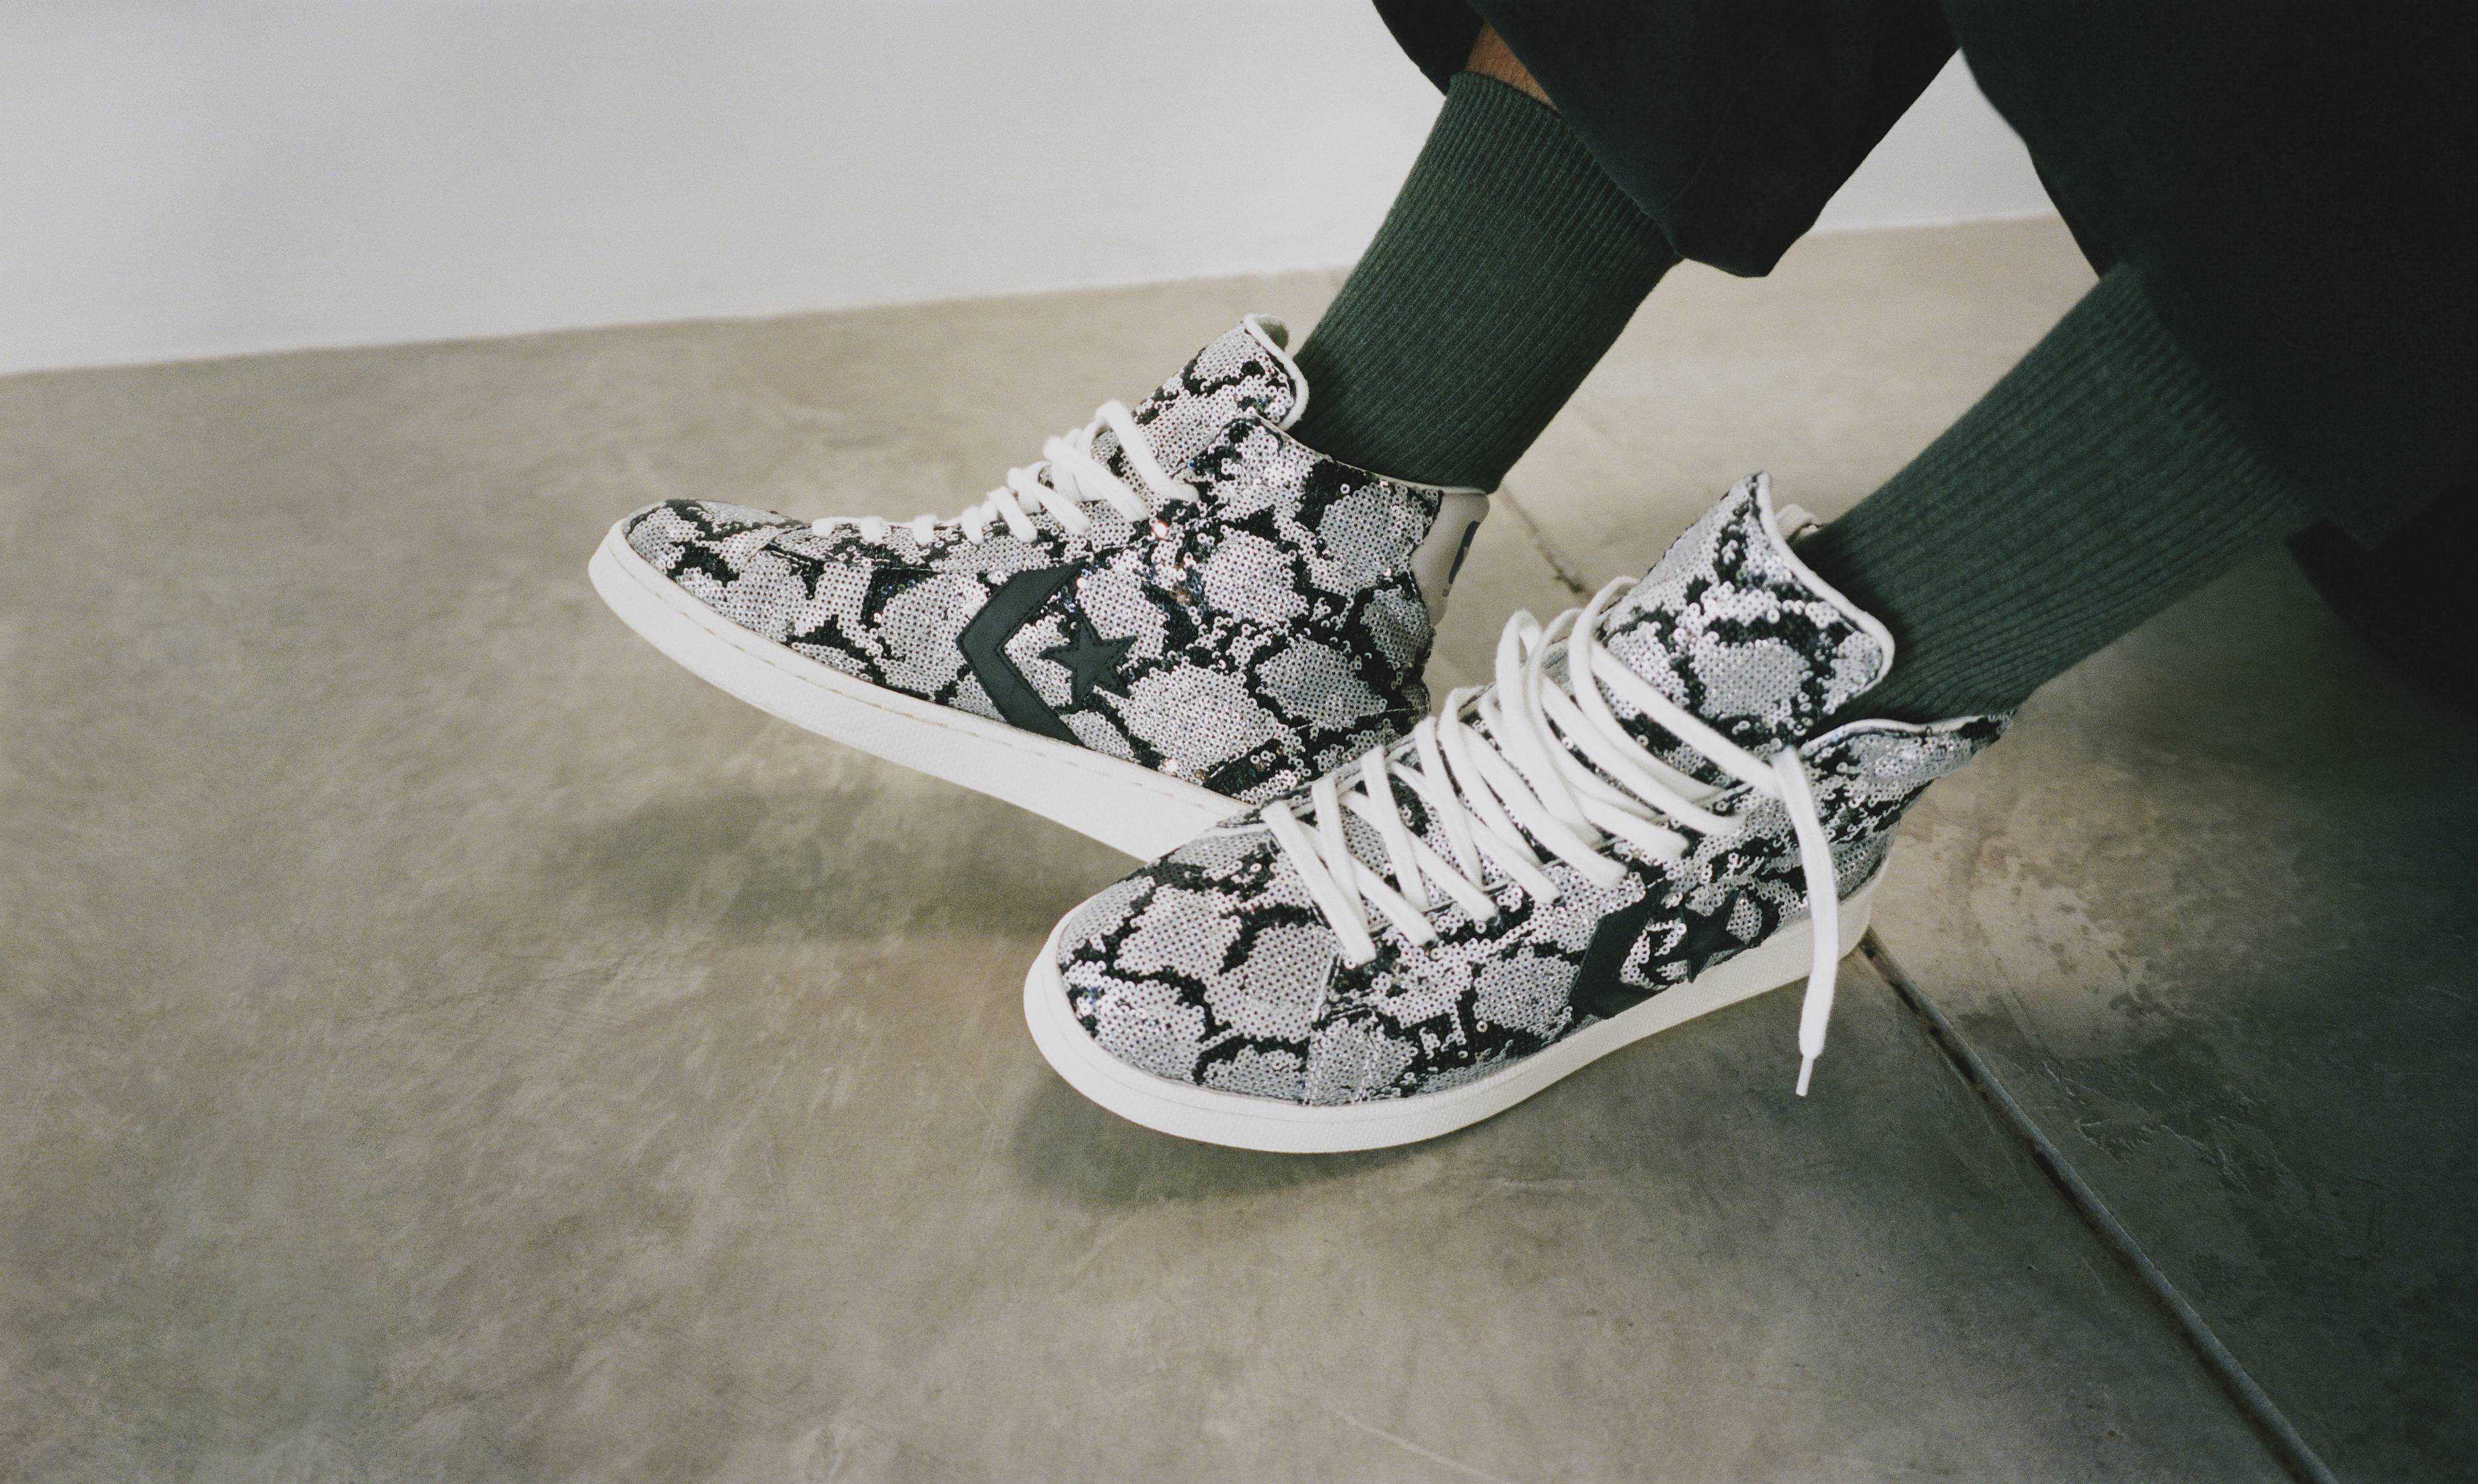 sivasdescalzo on Twitter: "@converse updates the 70 Hi and Pro Leather in a dazzling array of snakeskin inspired sequin models. All three pairs available to shop now at SVD. #svd #sivasdescalzo #